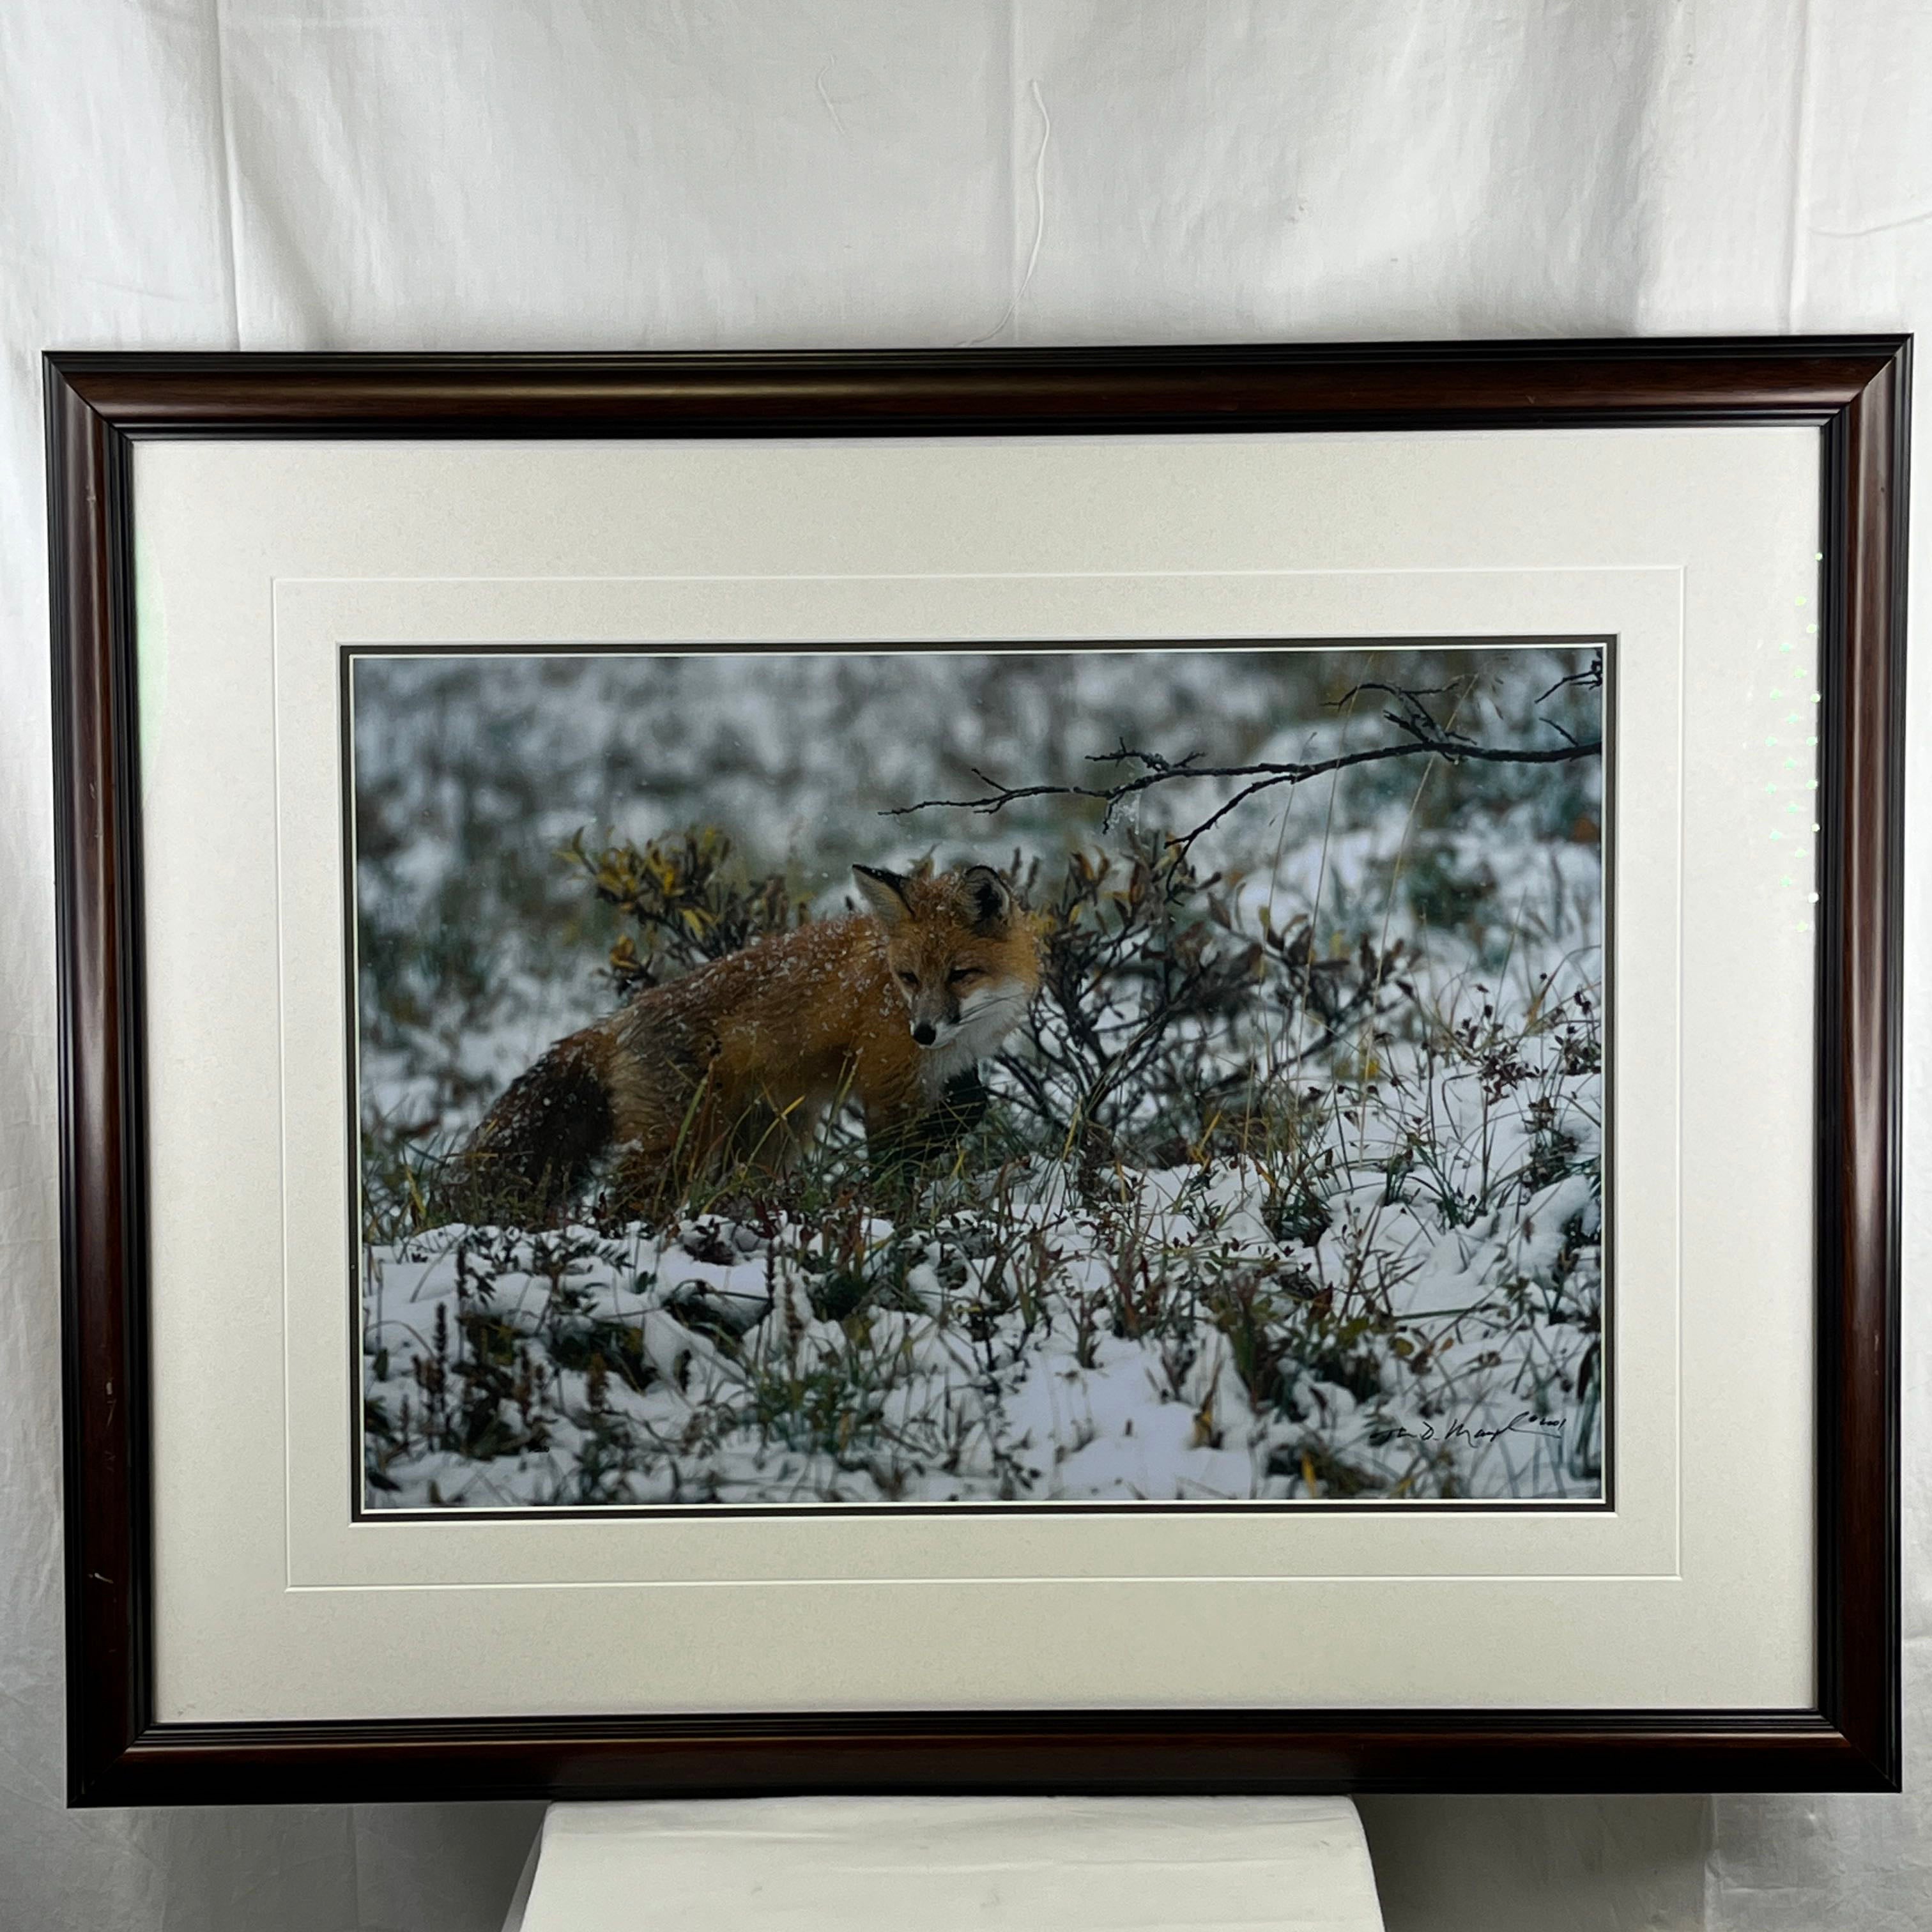 Early Snow by Thomas D. Mangelsen Signed 36/200 Framed Print